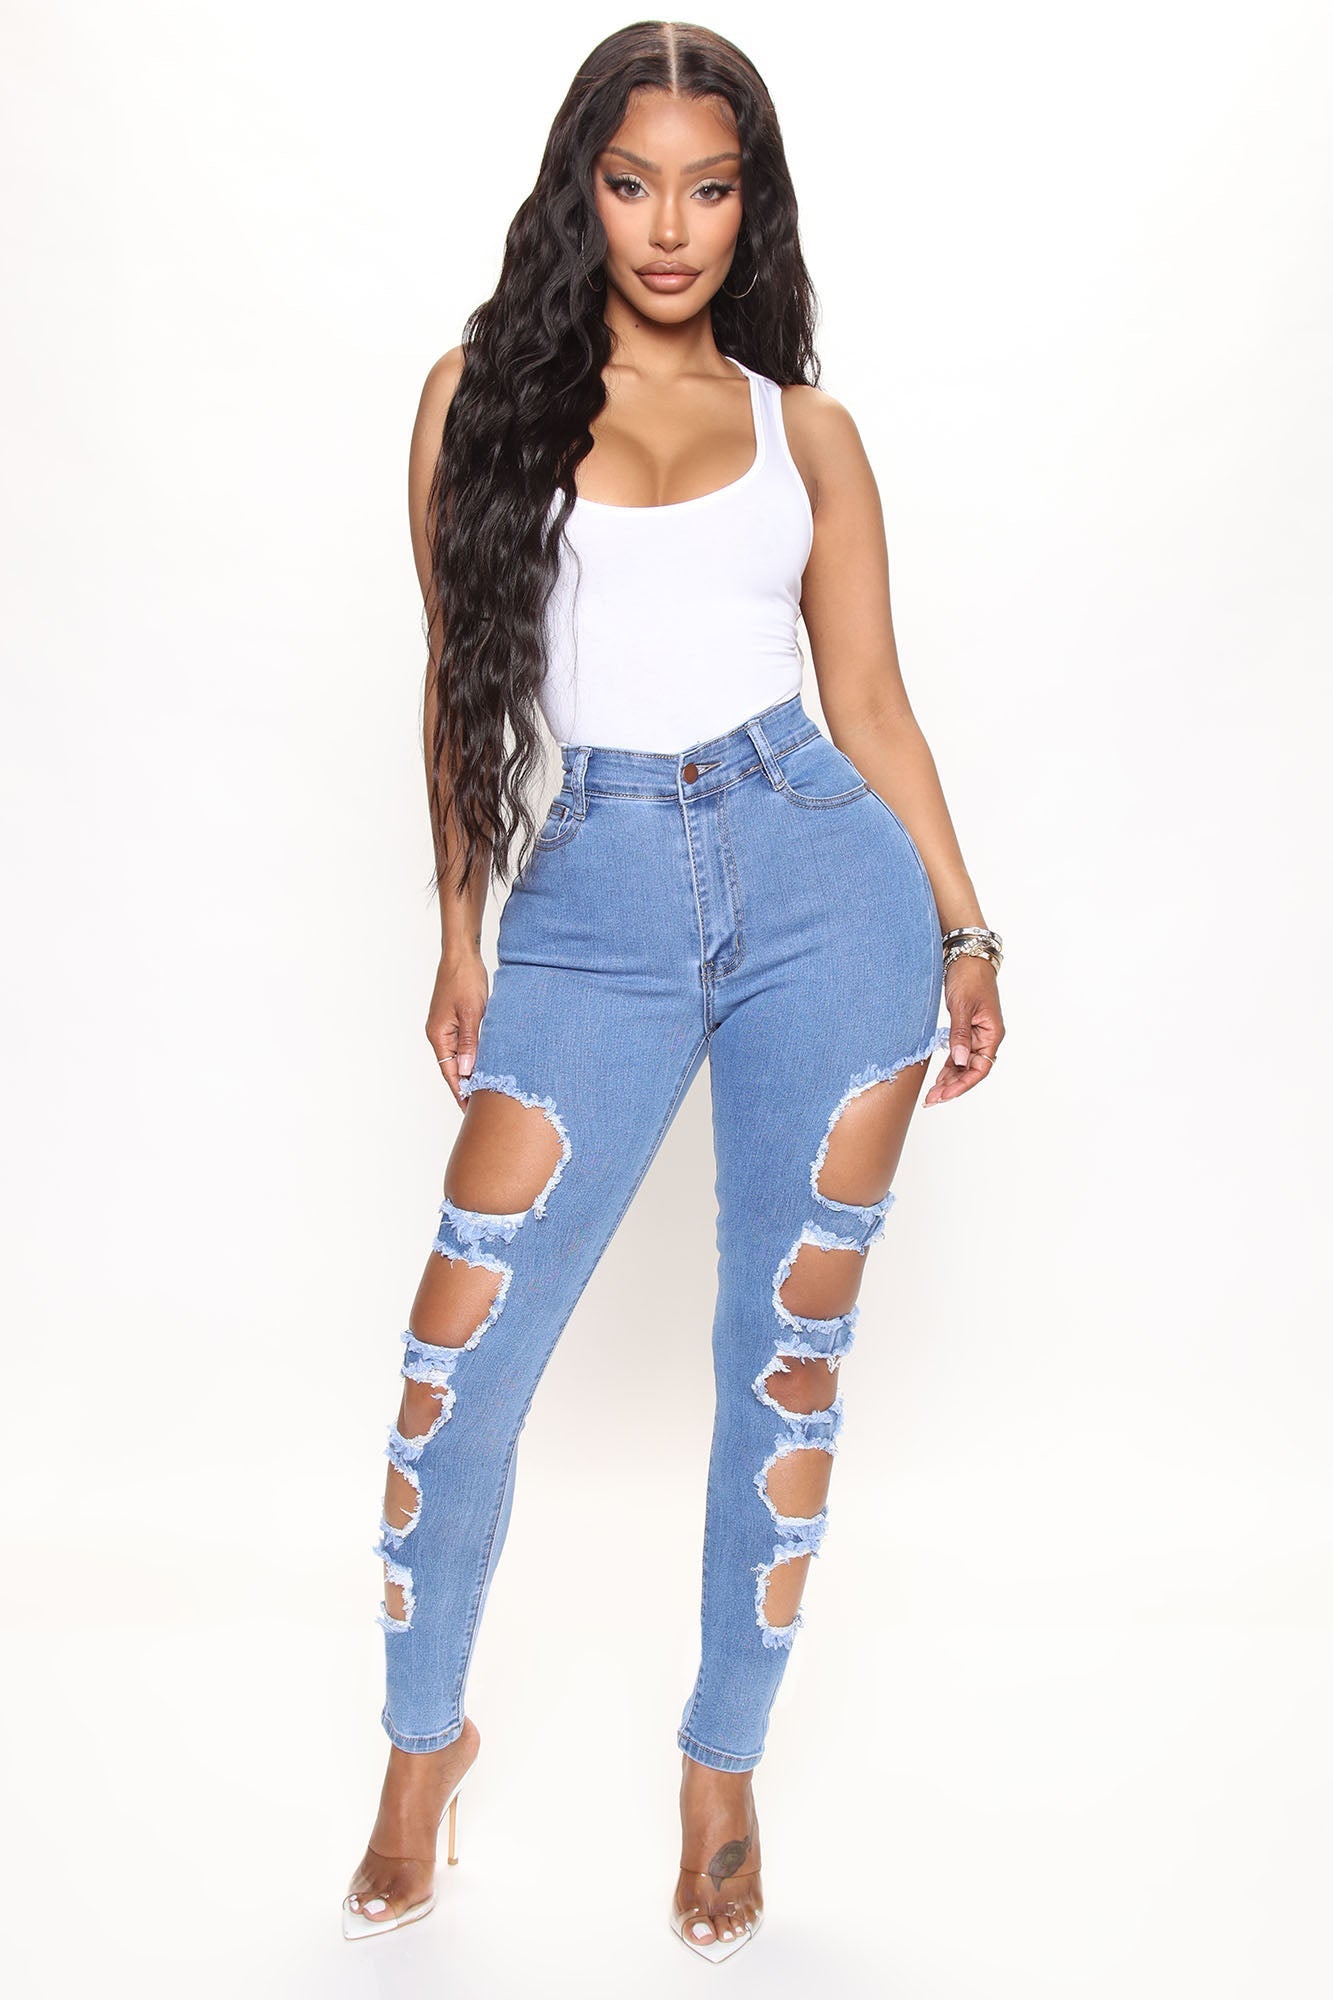 Around The Block Distressed Skinny Jeans Blue Wash